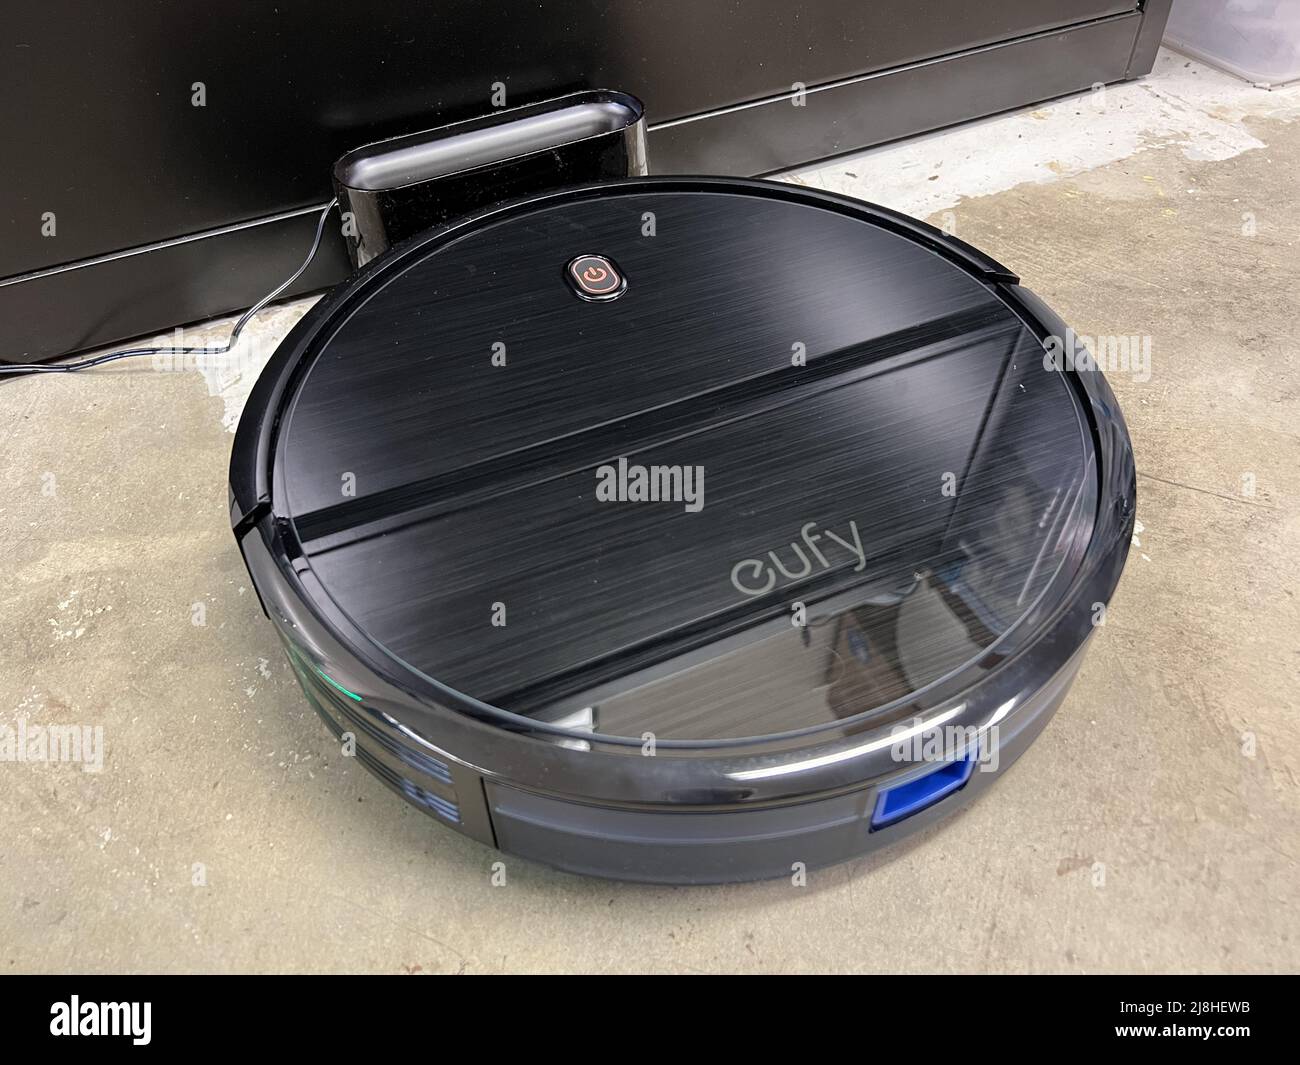 Eufy Robovac robotic vacuum cleaner from Anker in charger in domestic room, Lafayette, California, March 4, 2022. Photo courtesy Tech Trends. Stock Photo